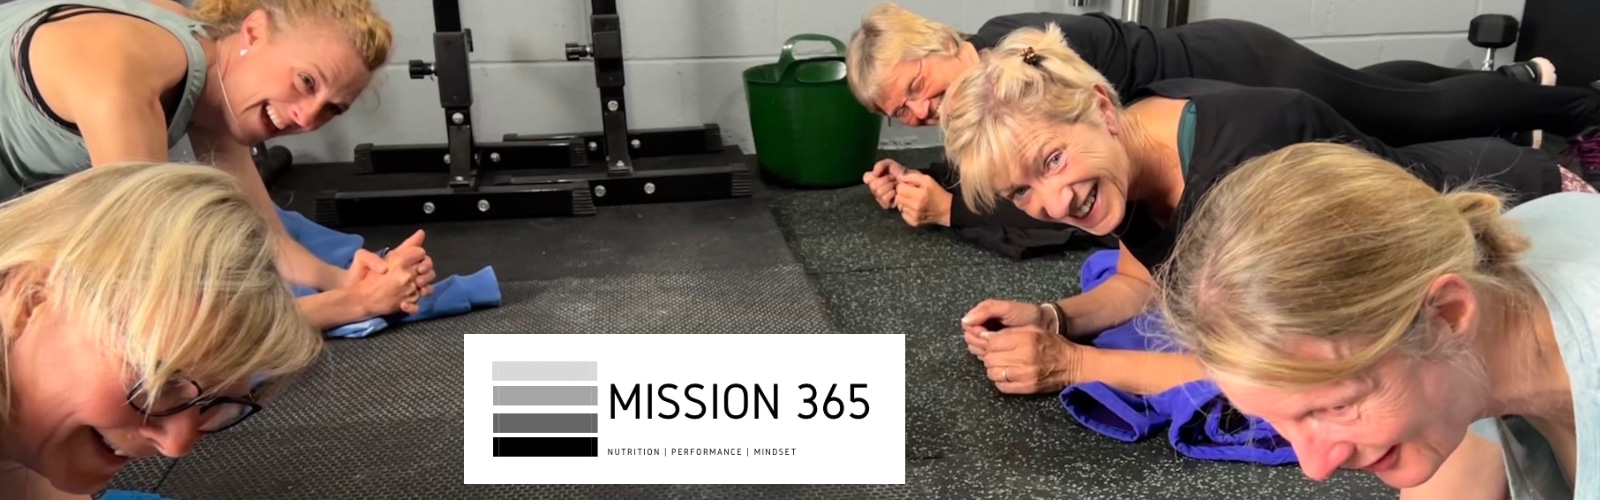 Mission 365 Exercise Class